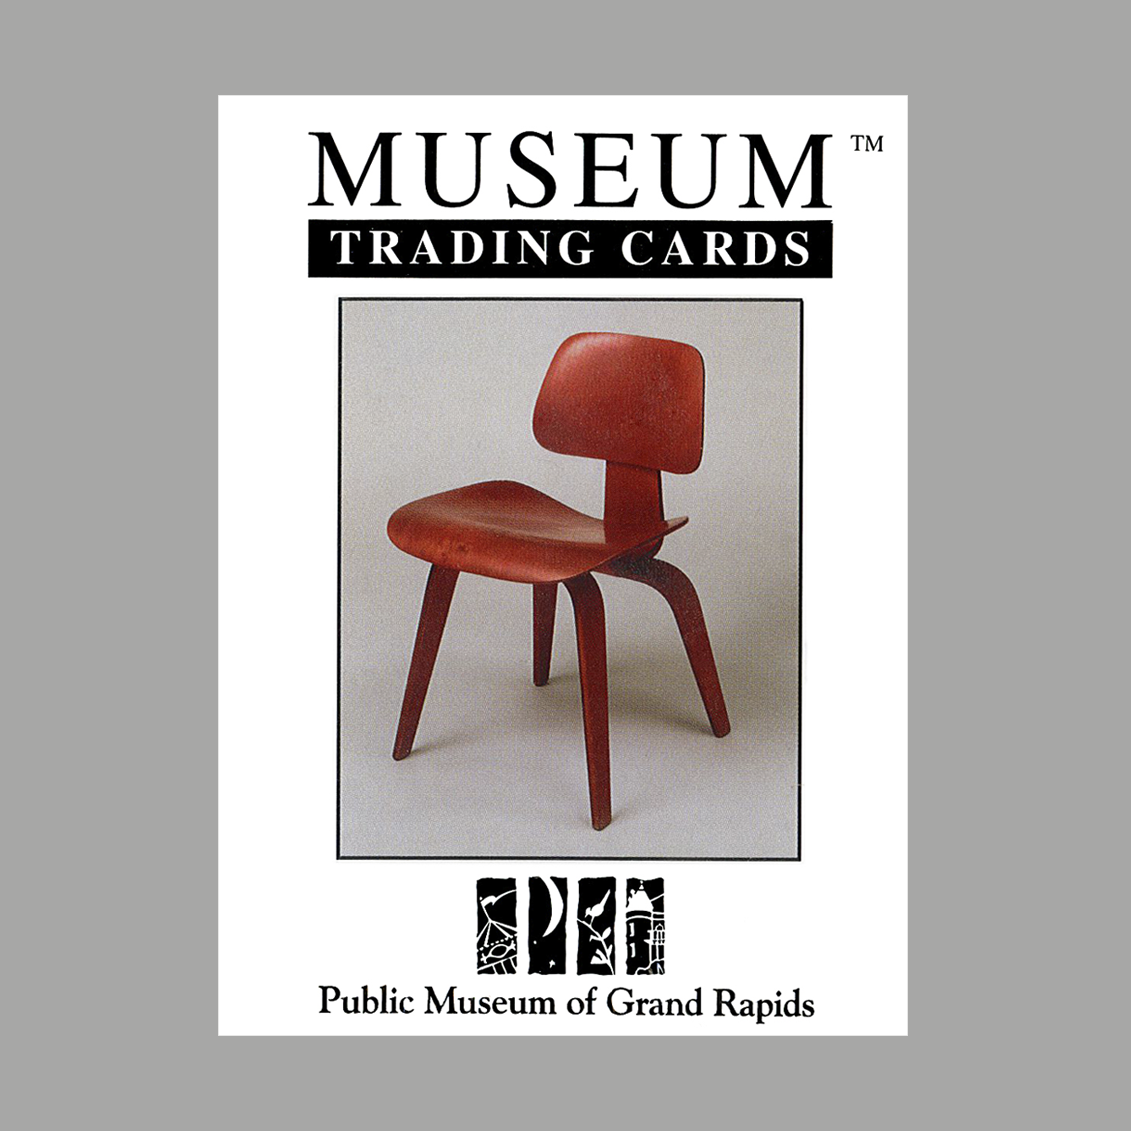 "Museum" Trading Cards